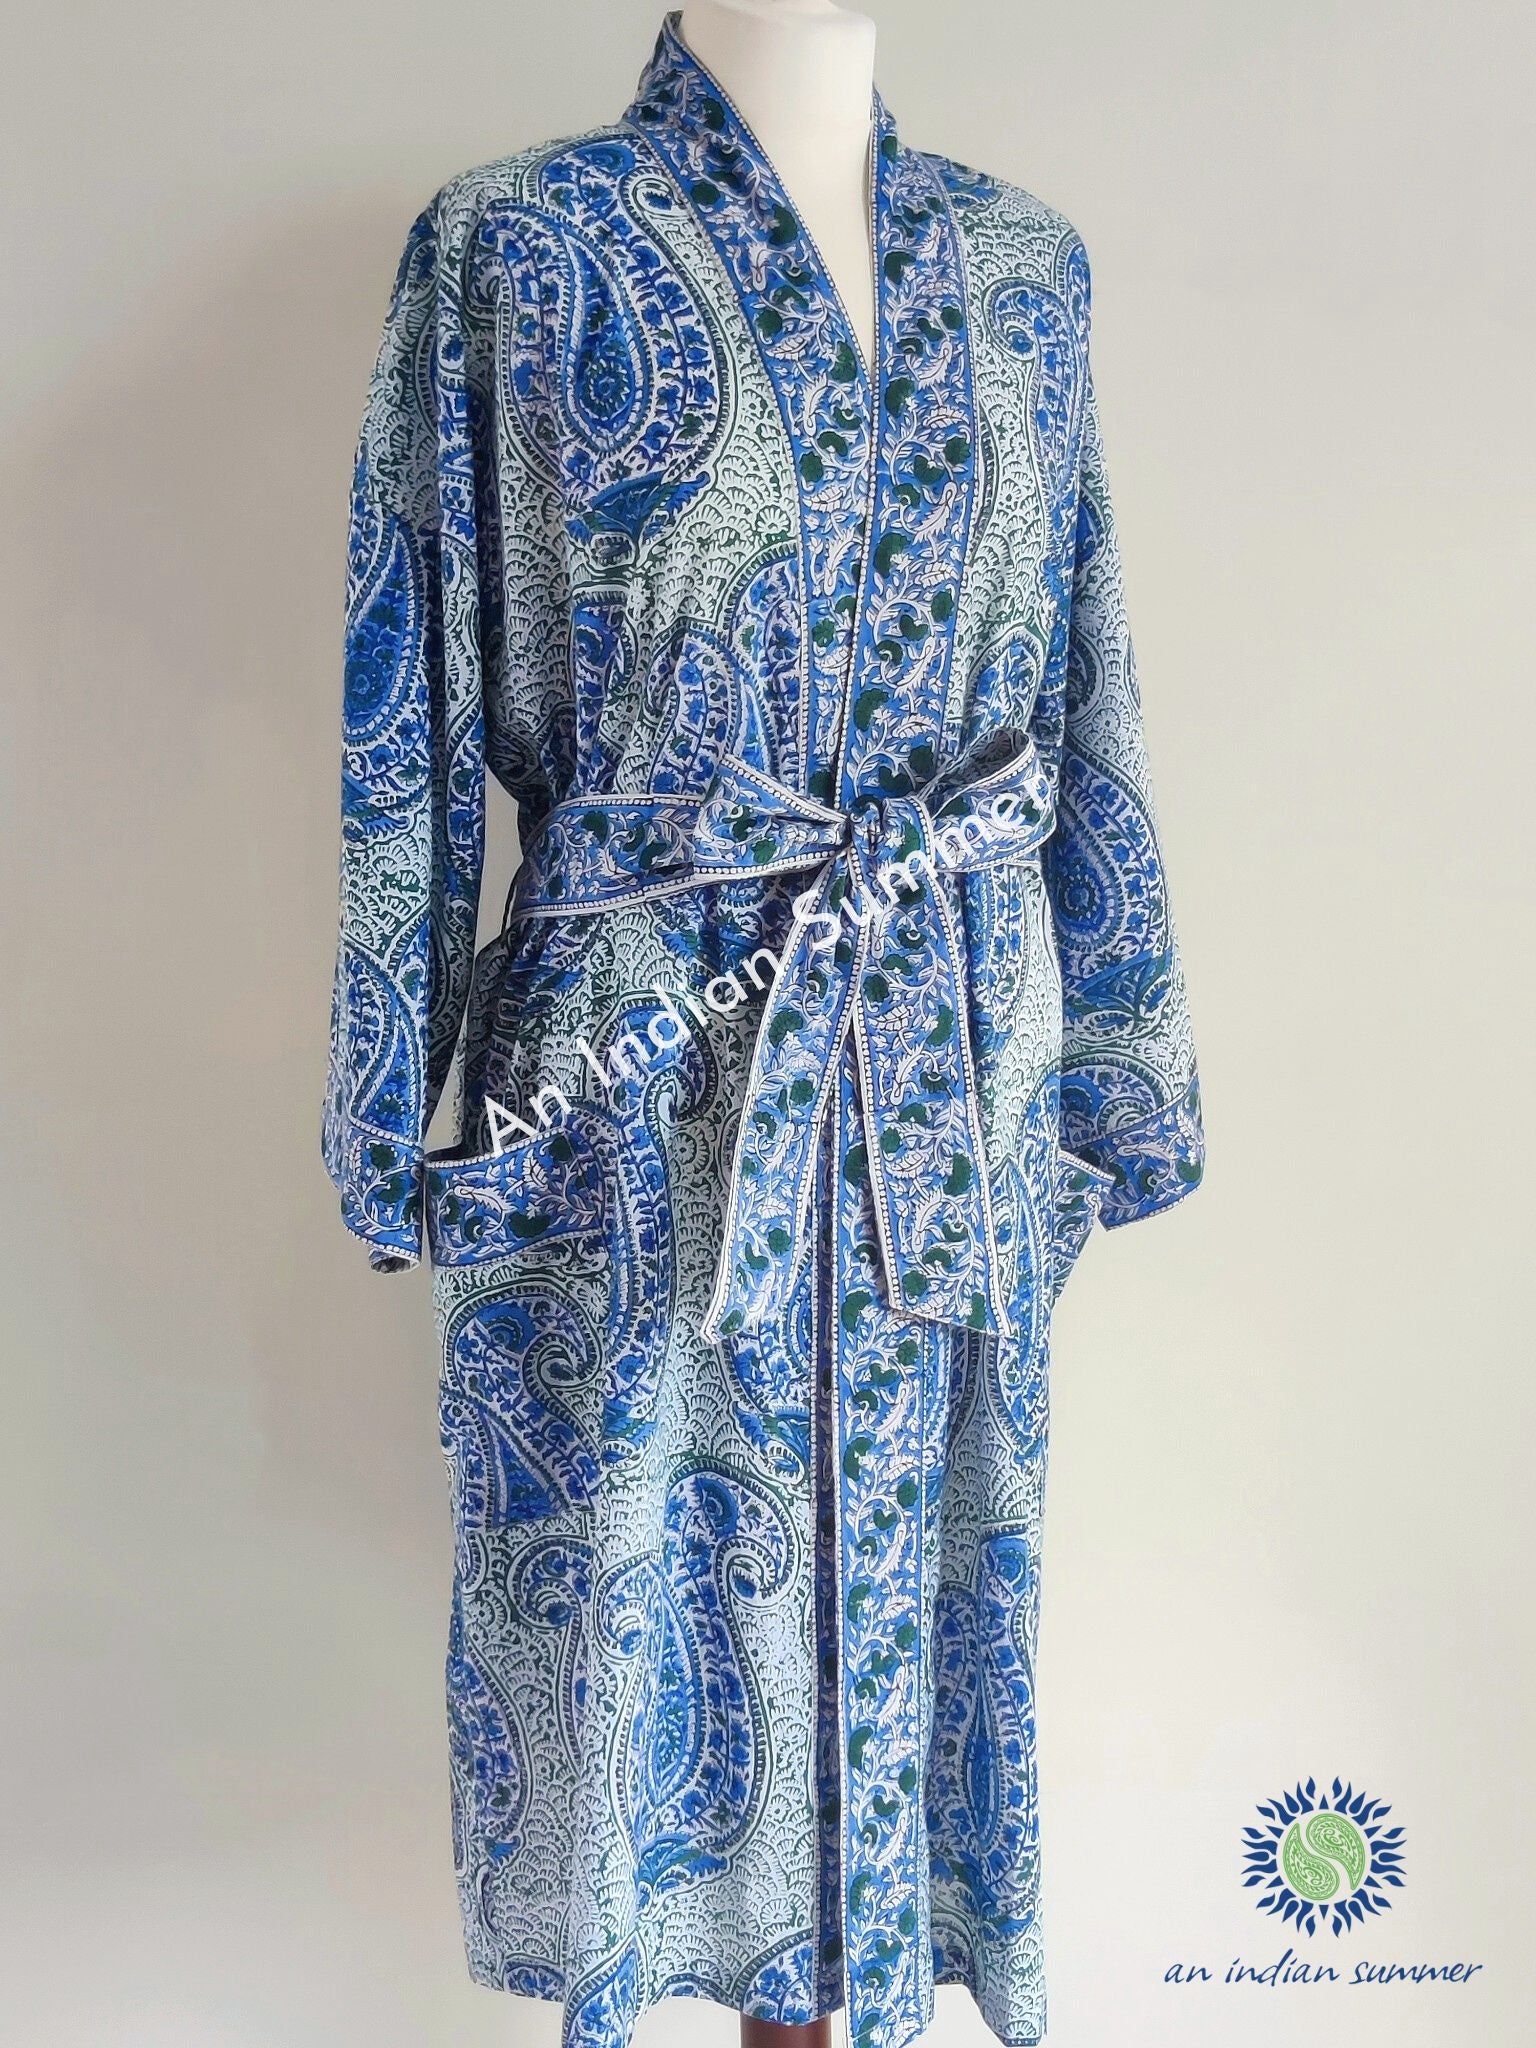 Kimono Robe | Paisley | Blue & Green | Paisley Block Print | Hand Block Printed | Cotton Voile | An Indian Summer | Seasonless Timeless Sustainable Ethical Authentic Artisan Conscious Clothing Lifestyle Brand